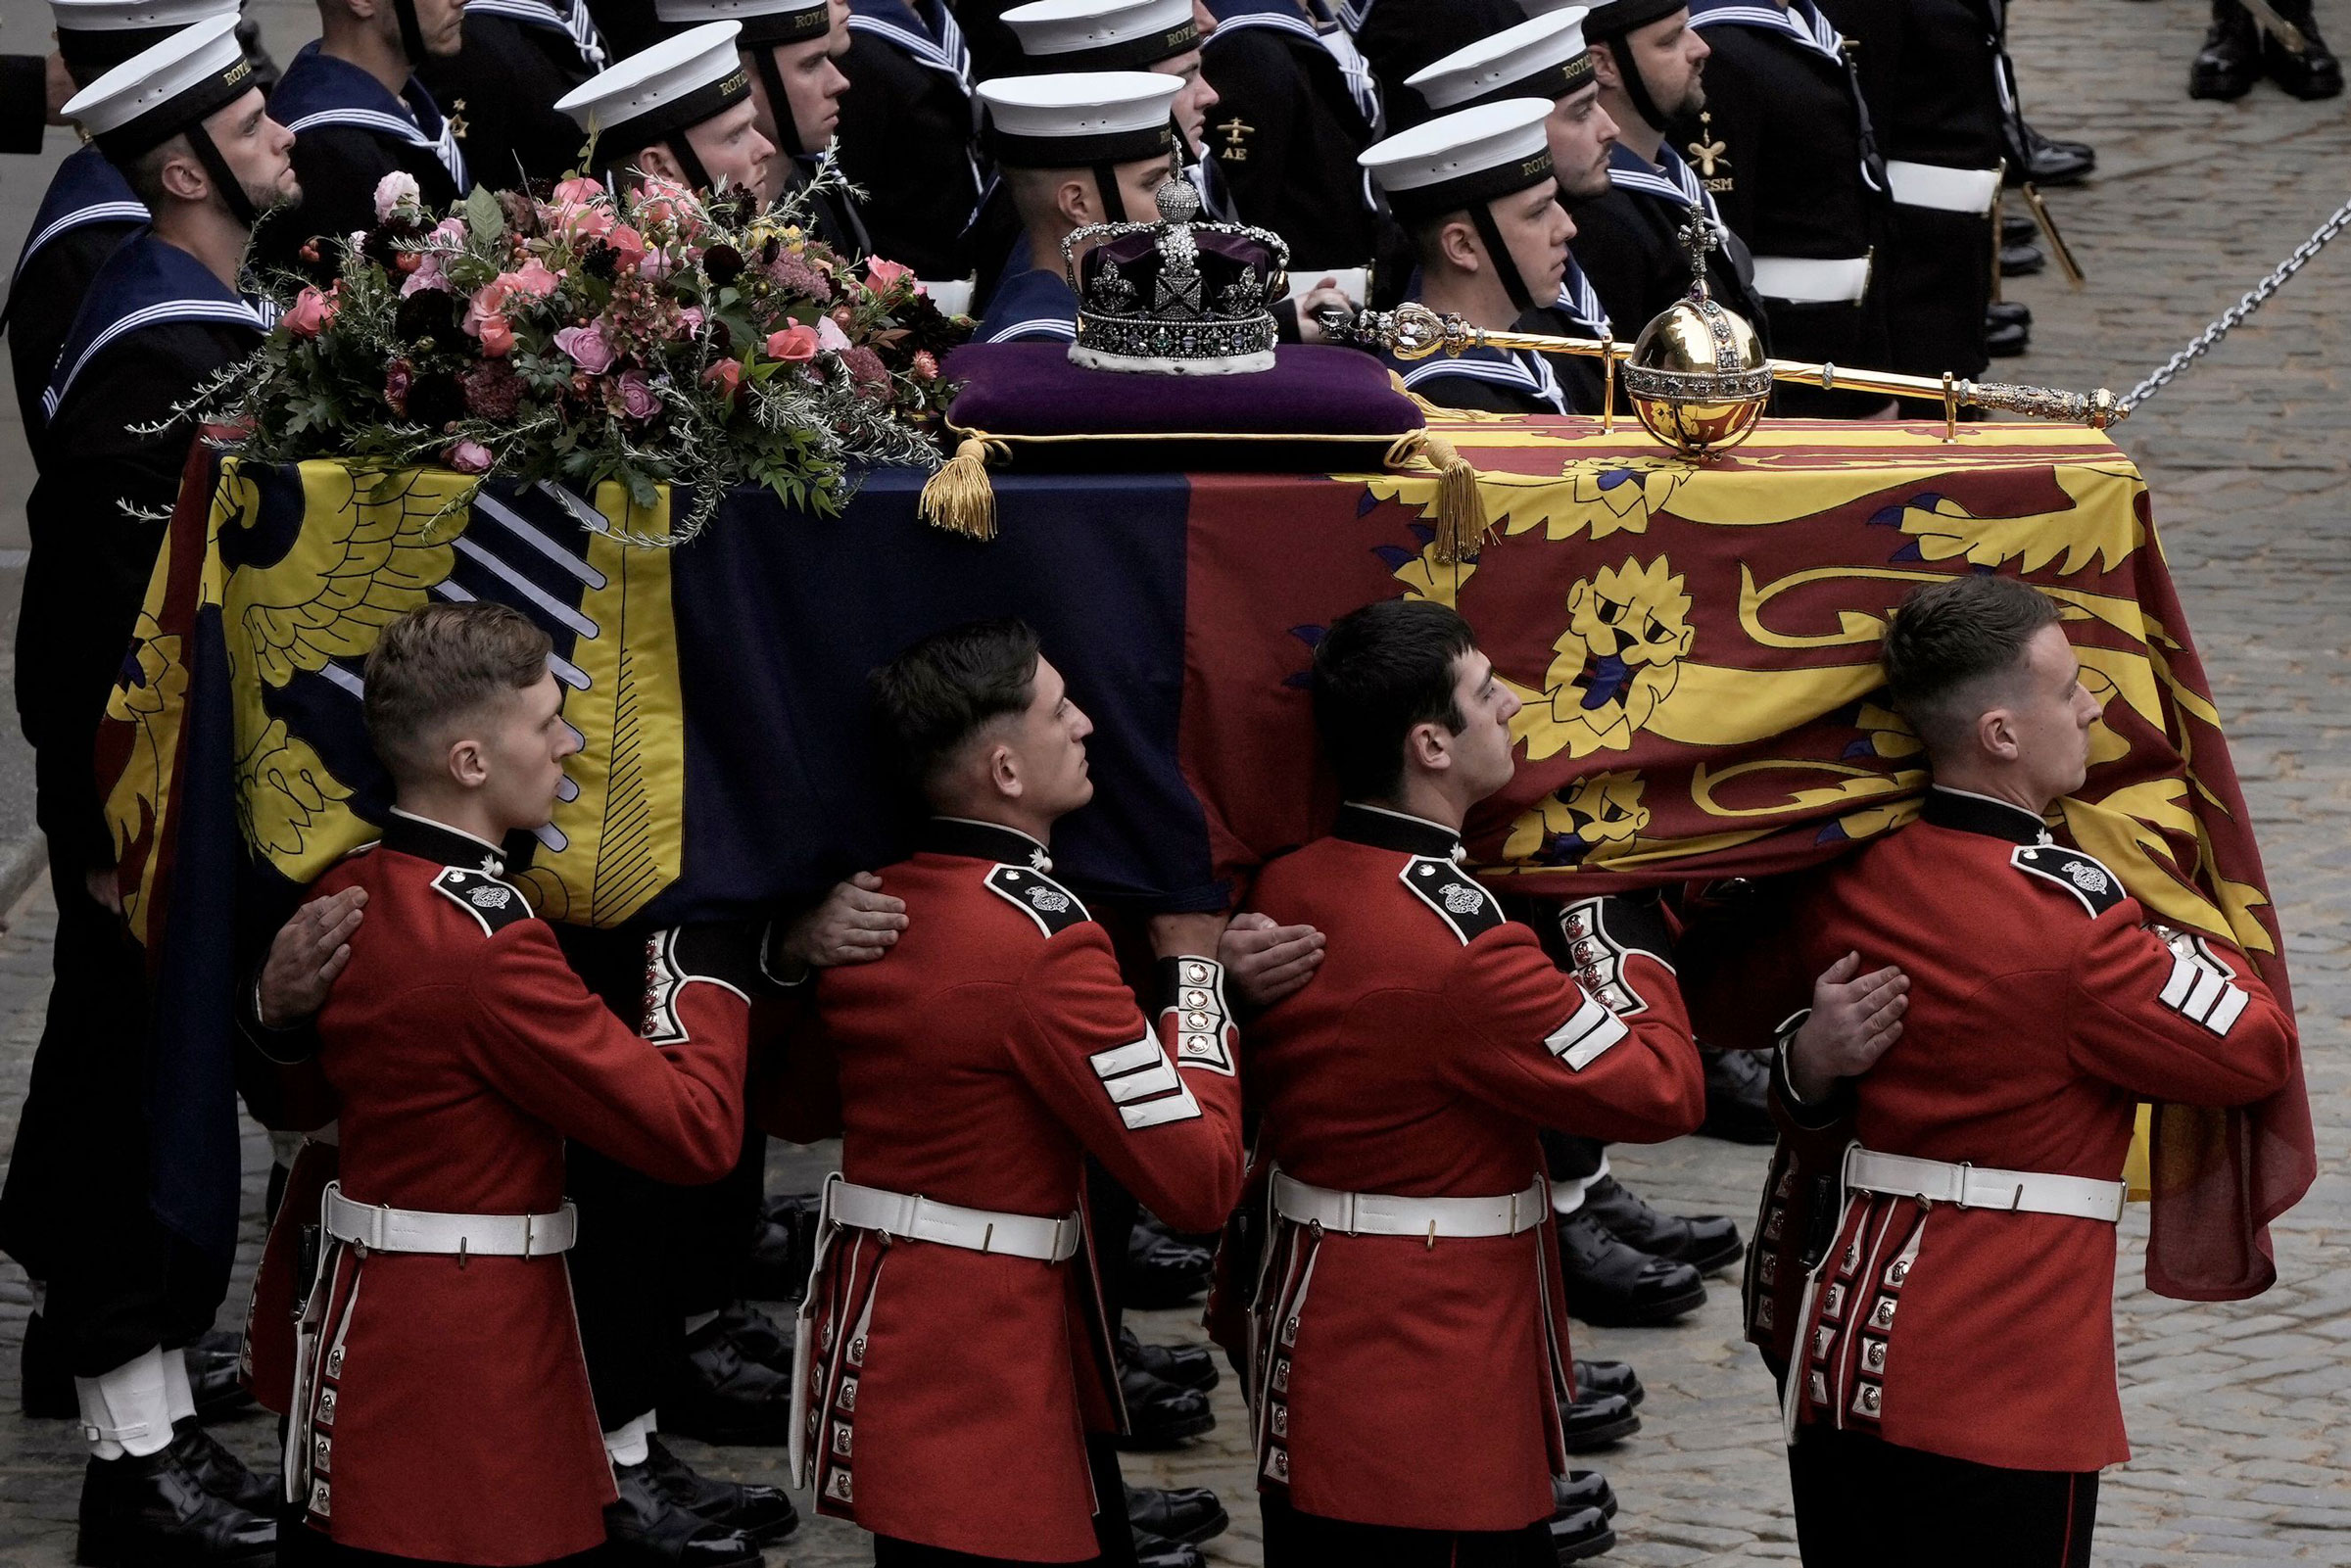 Queen Elizabeth II's coffin is loaded onto a carriage that was pulled by Royal Navy sailors on its journey from Westminster Hall to the funeral service at Westminster Abbey.  (Nariman El-Mofty—Pool/AFP/Getty Images)